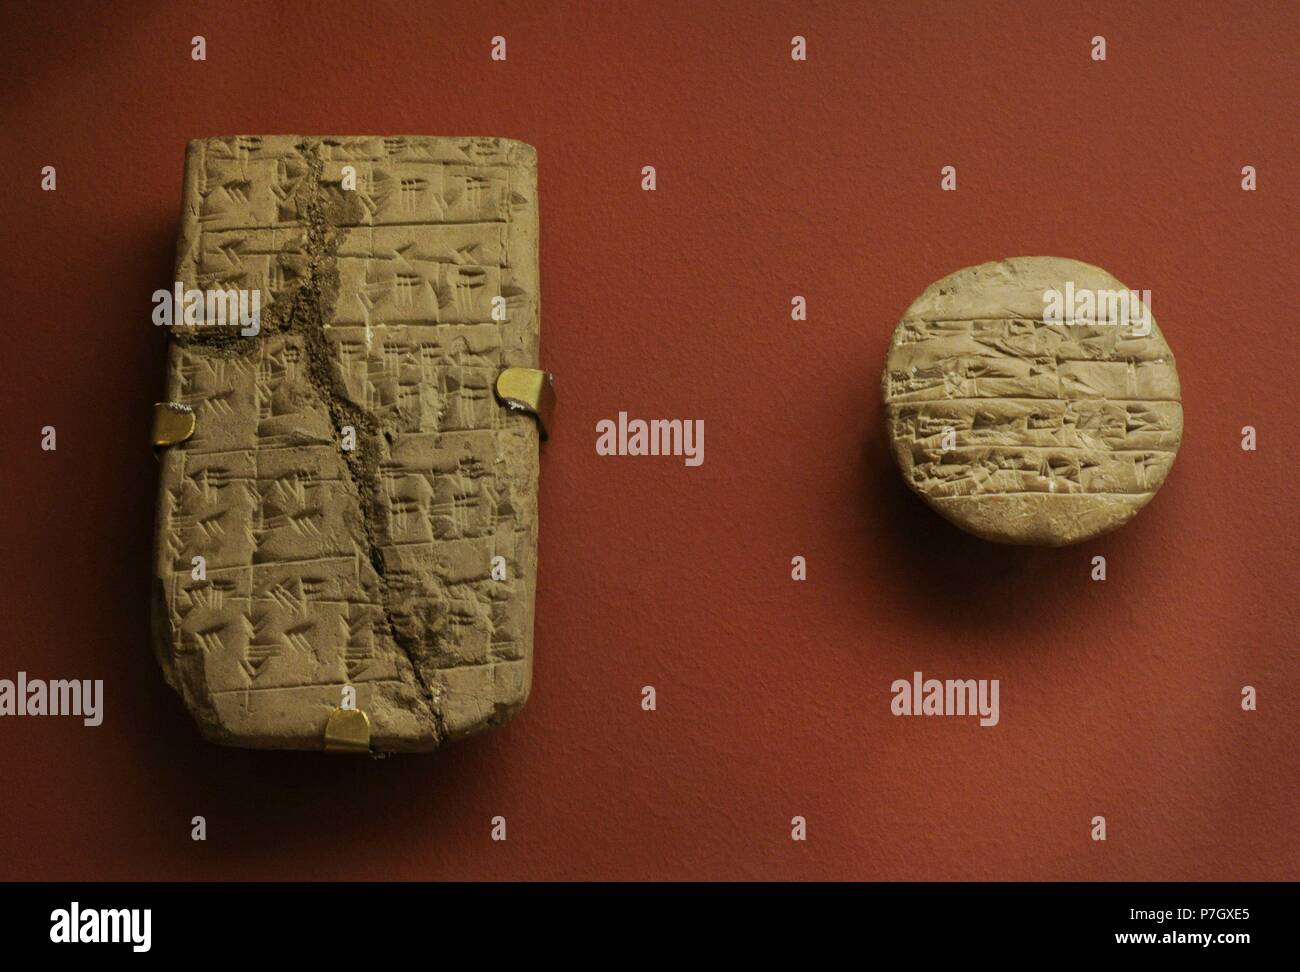 Sumer. Mesopotamia. Right: School tablet. Sumerian words. The exercise was probably corrected by a teacher. Left: School mathematical tablet. The state Hermitage Museum. Saint Petersburg. Russia. Stock Photo